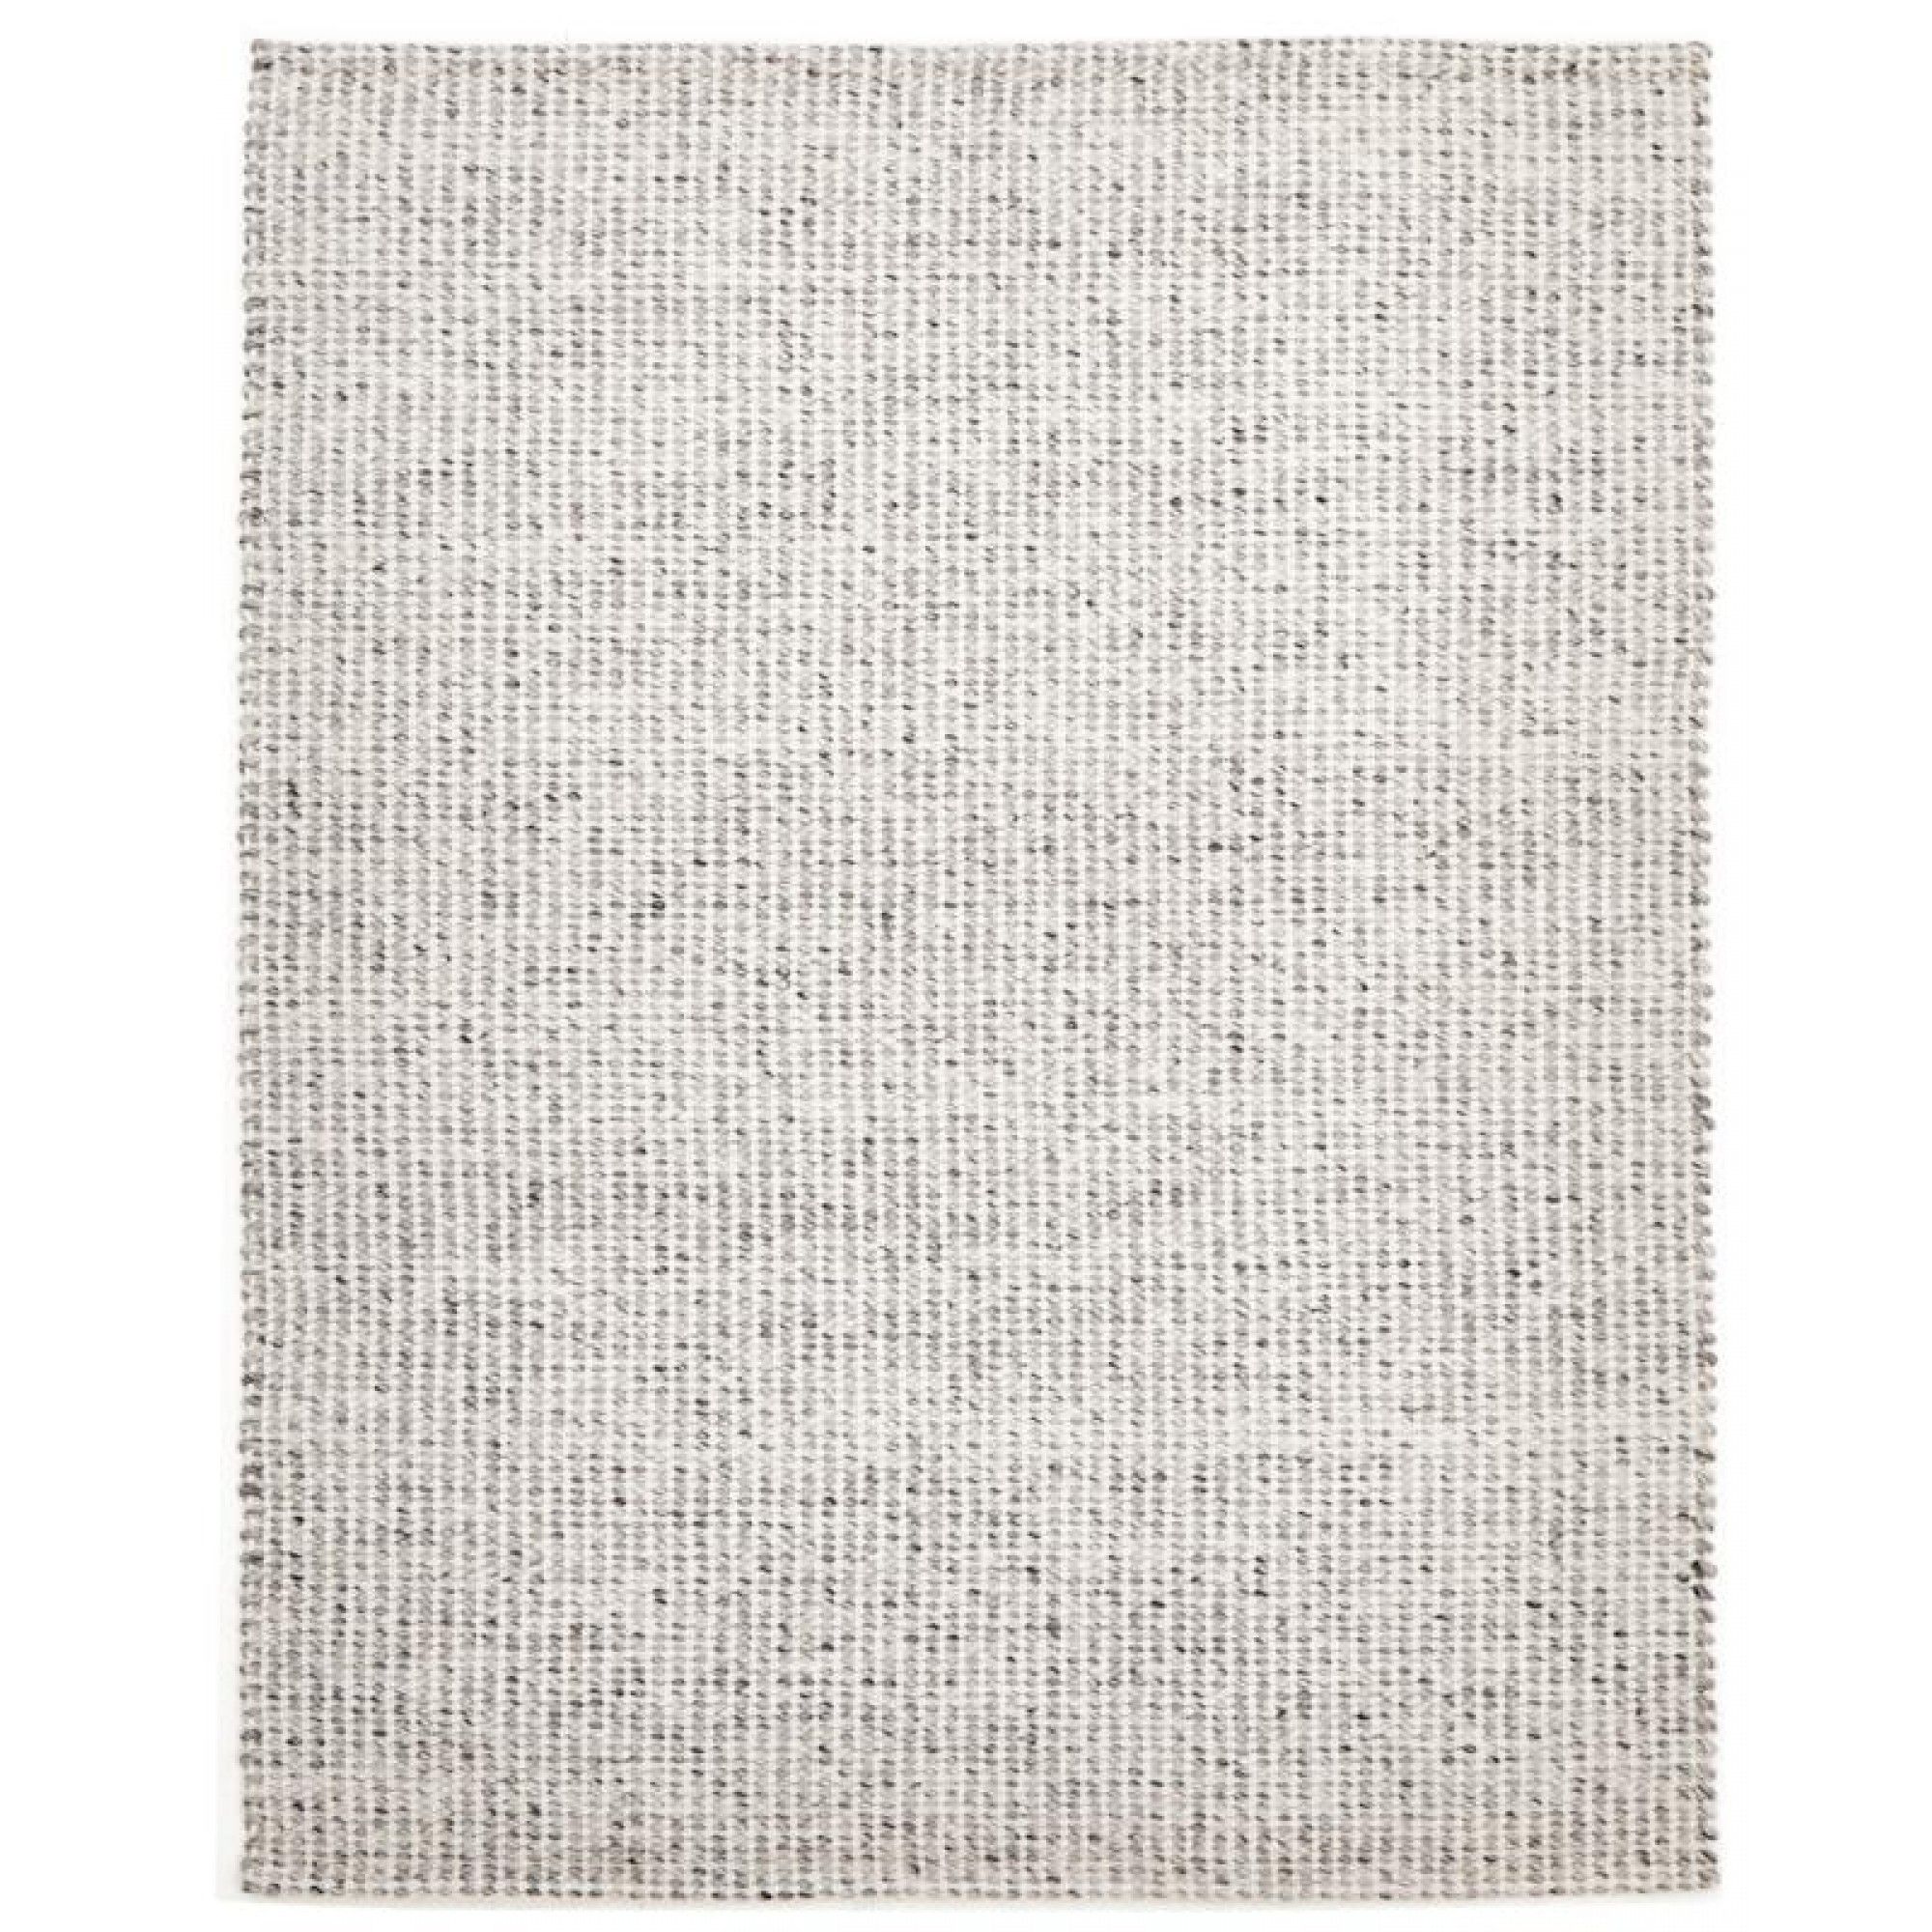 Caylos Felted Wool Floor Area Rug Grey Natural Free Shipping Intended For Natural Wool Area Rugs (Photo 192 of 264)